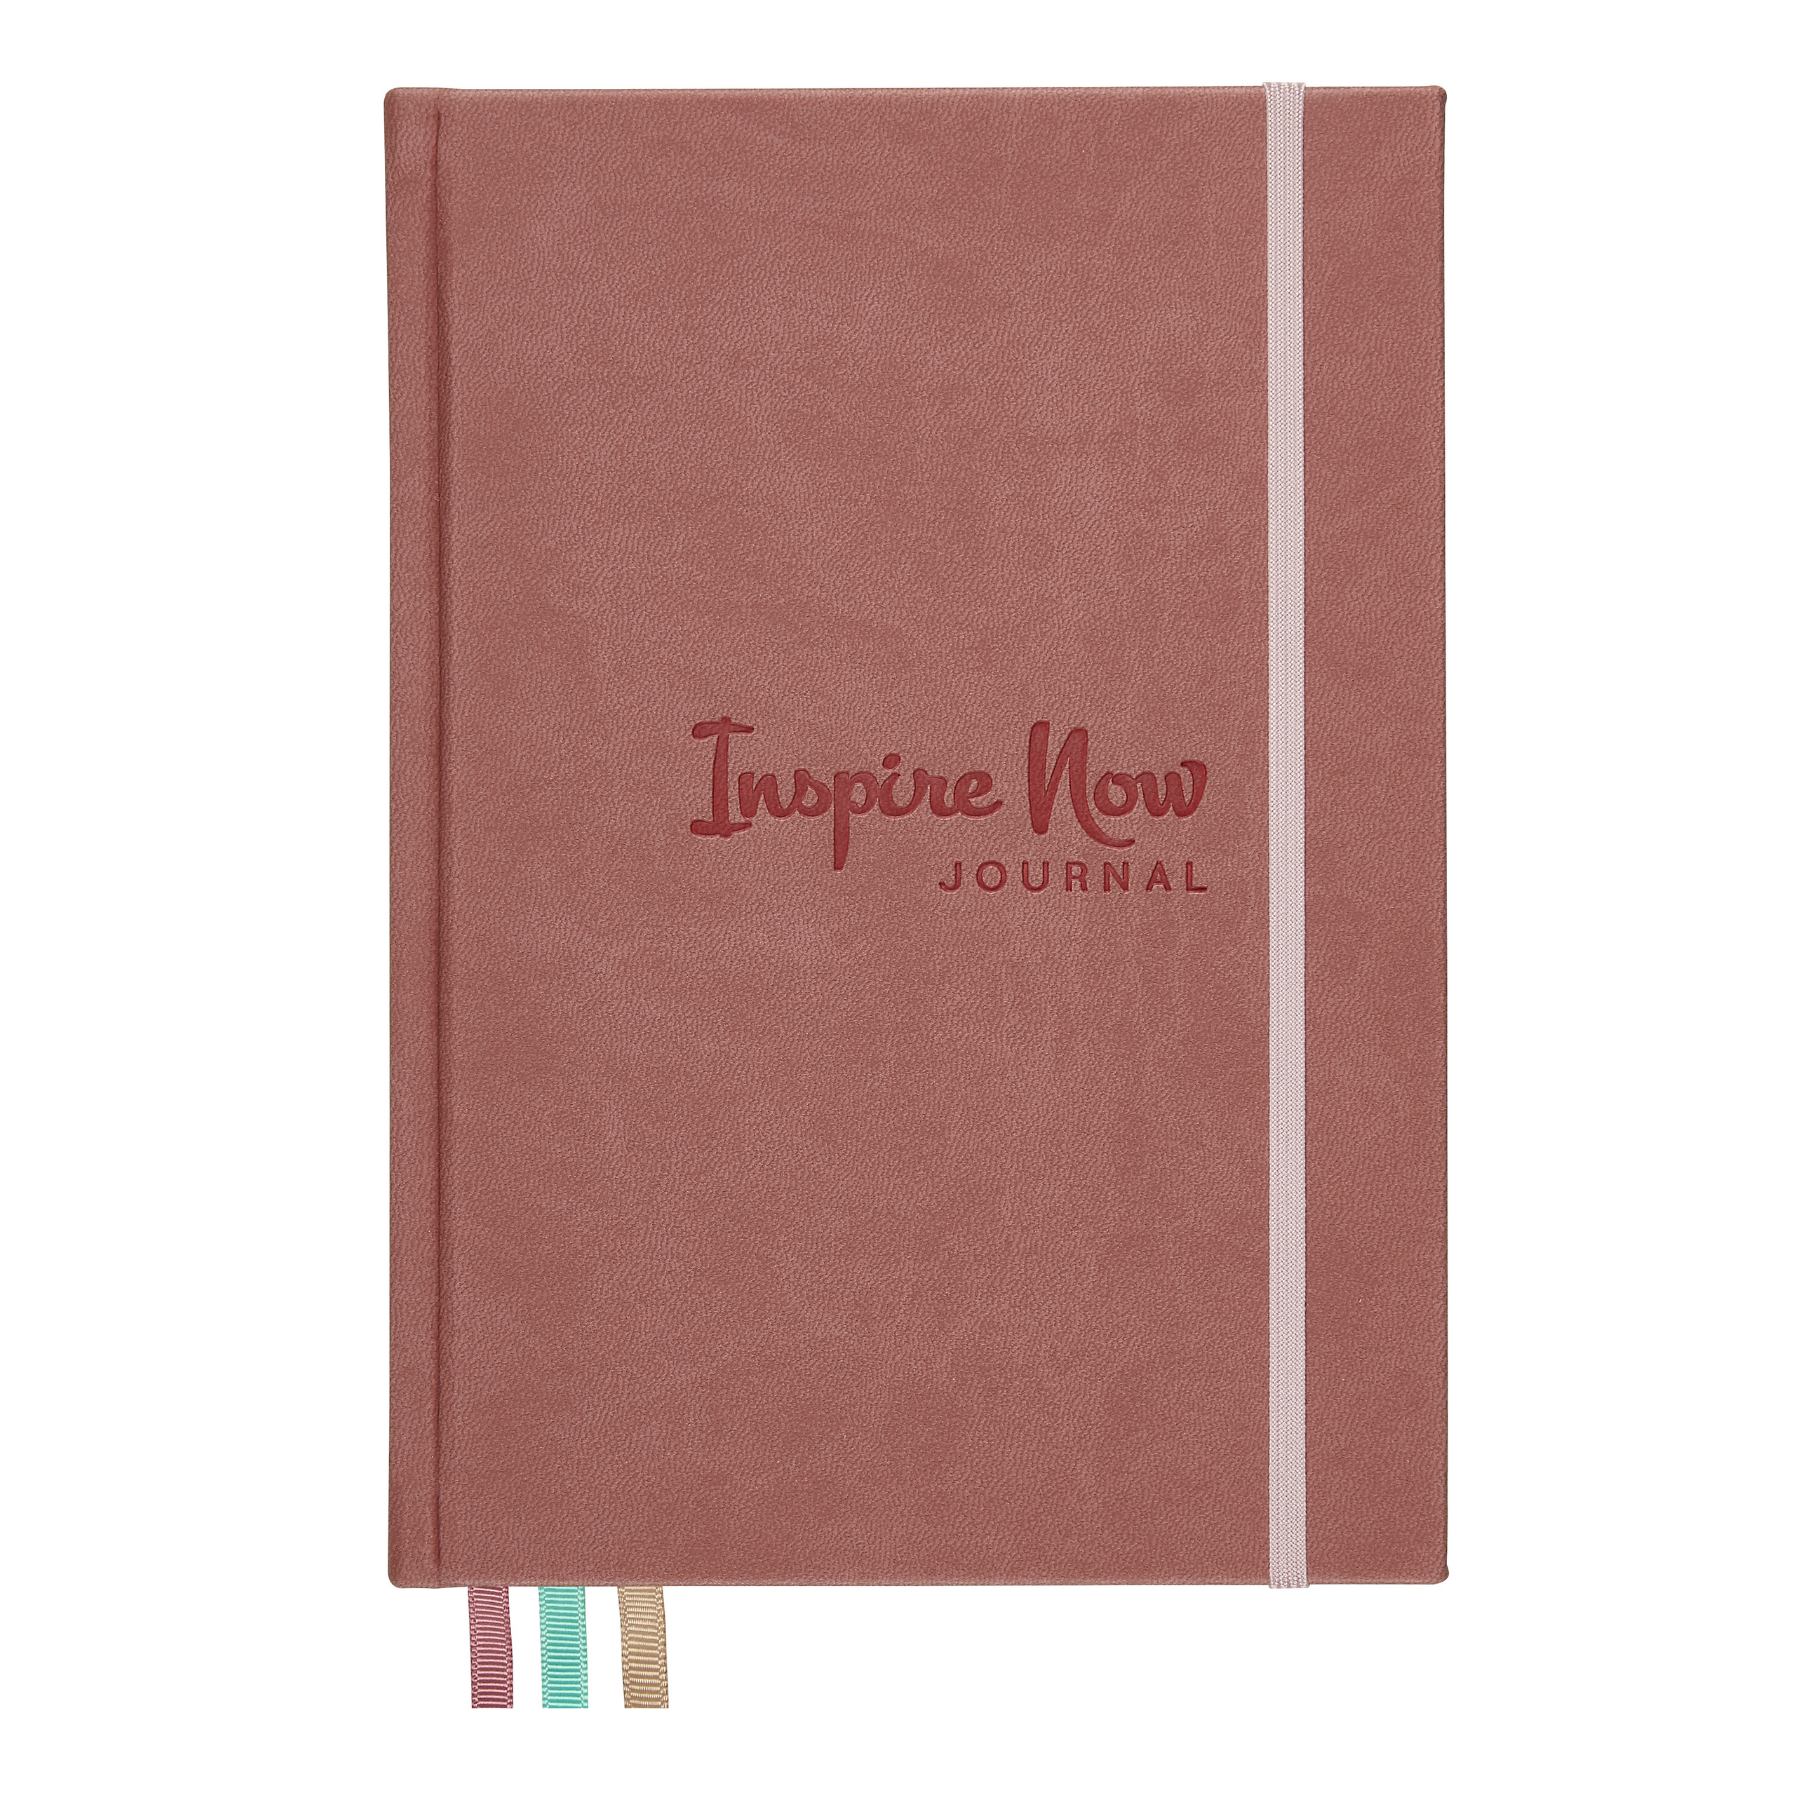 Inspire Now Journal - Undated Productivity Planner - Front Image 2